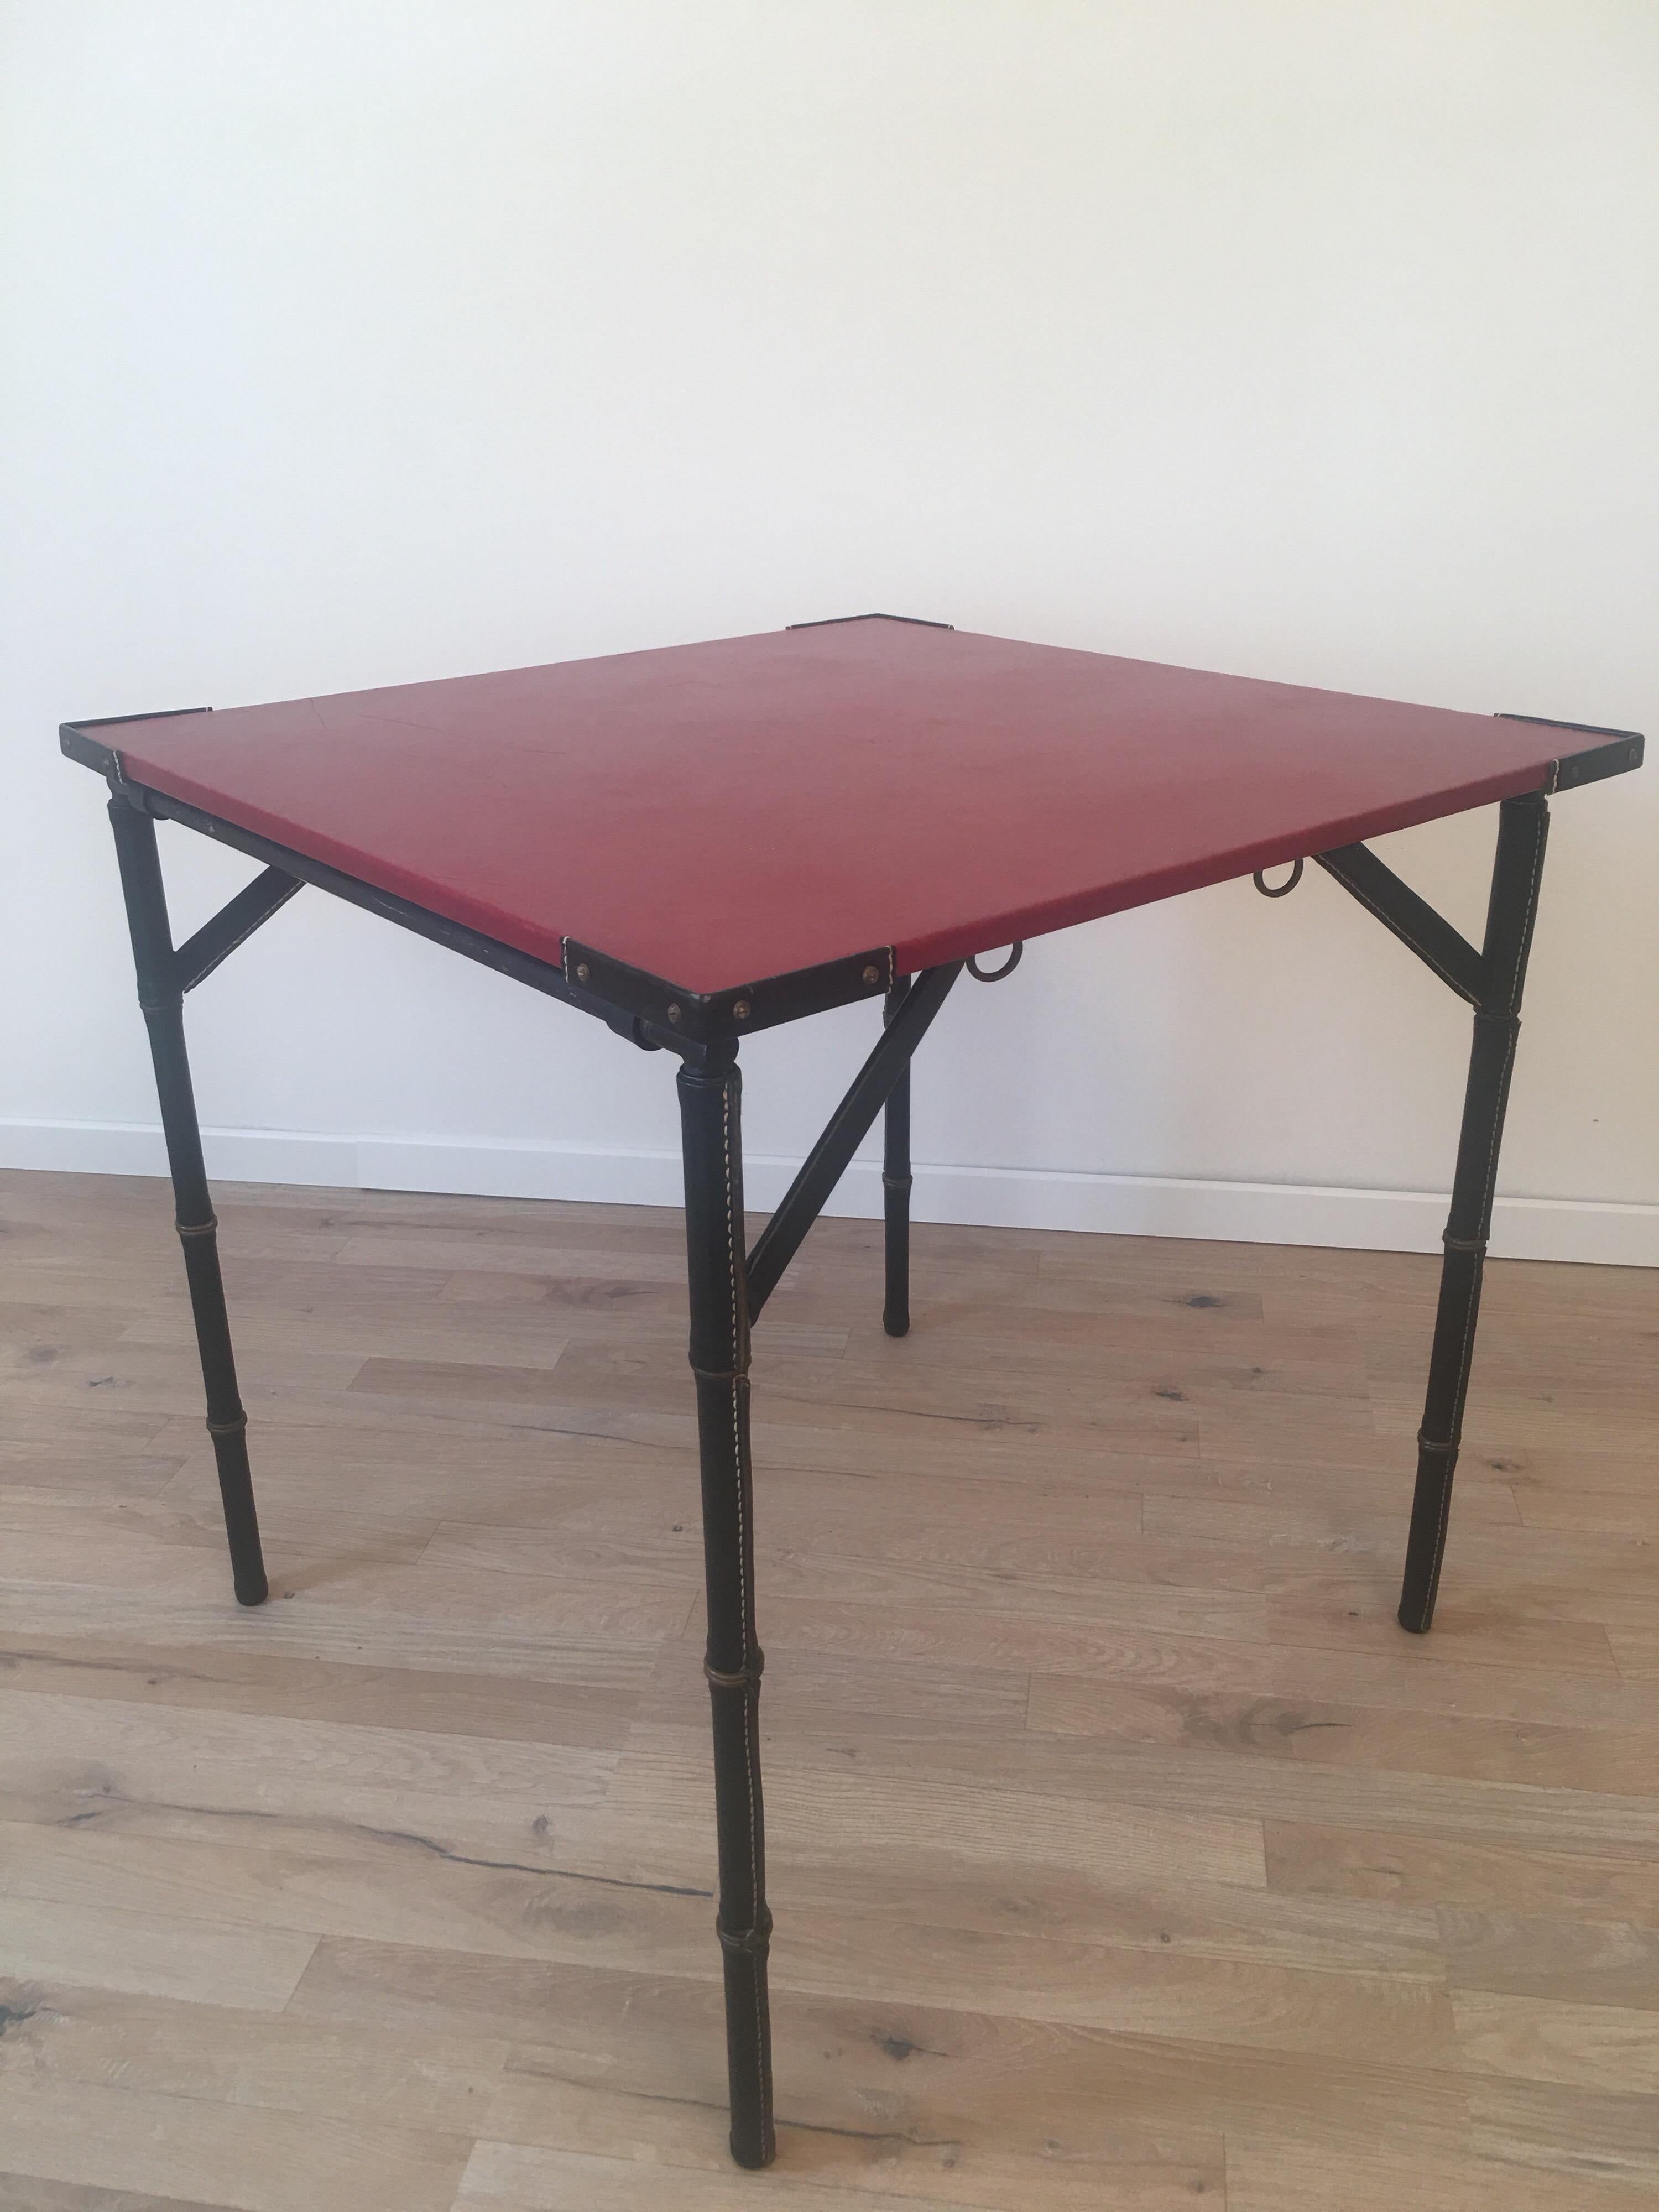 Rare red and black game table or side table designed by the famous French designer Jacques Adnet in 1950s.
Hand-stitched leather and bamboo brass design are characteristic elements of his work.
The table is very stable and completely folds down